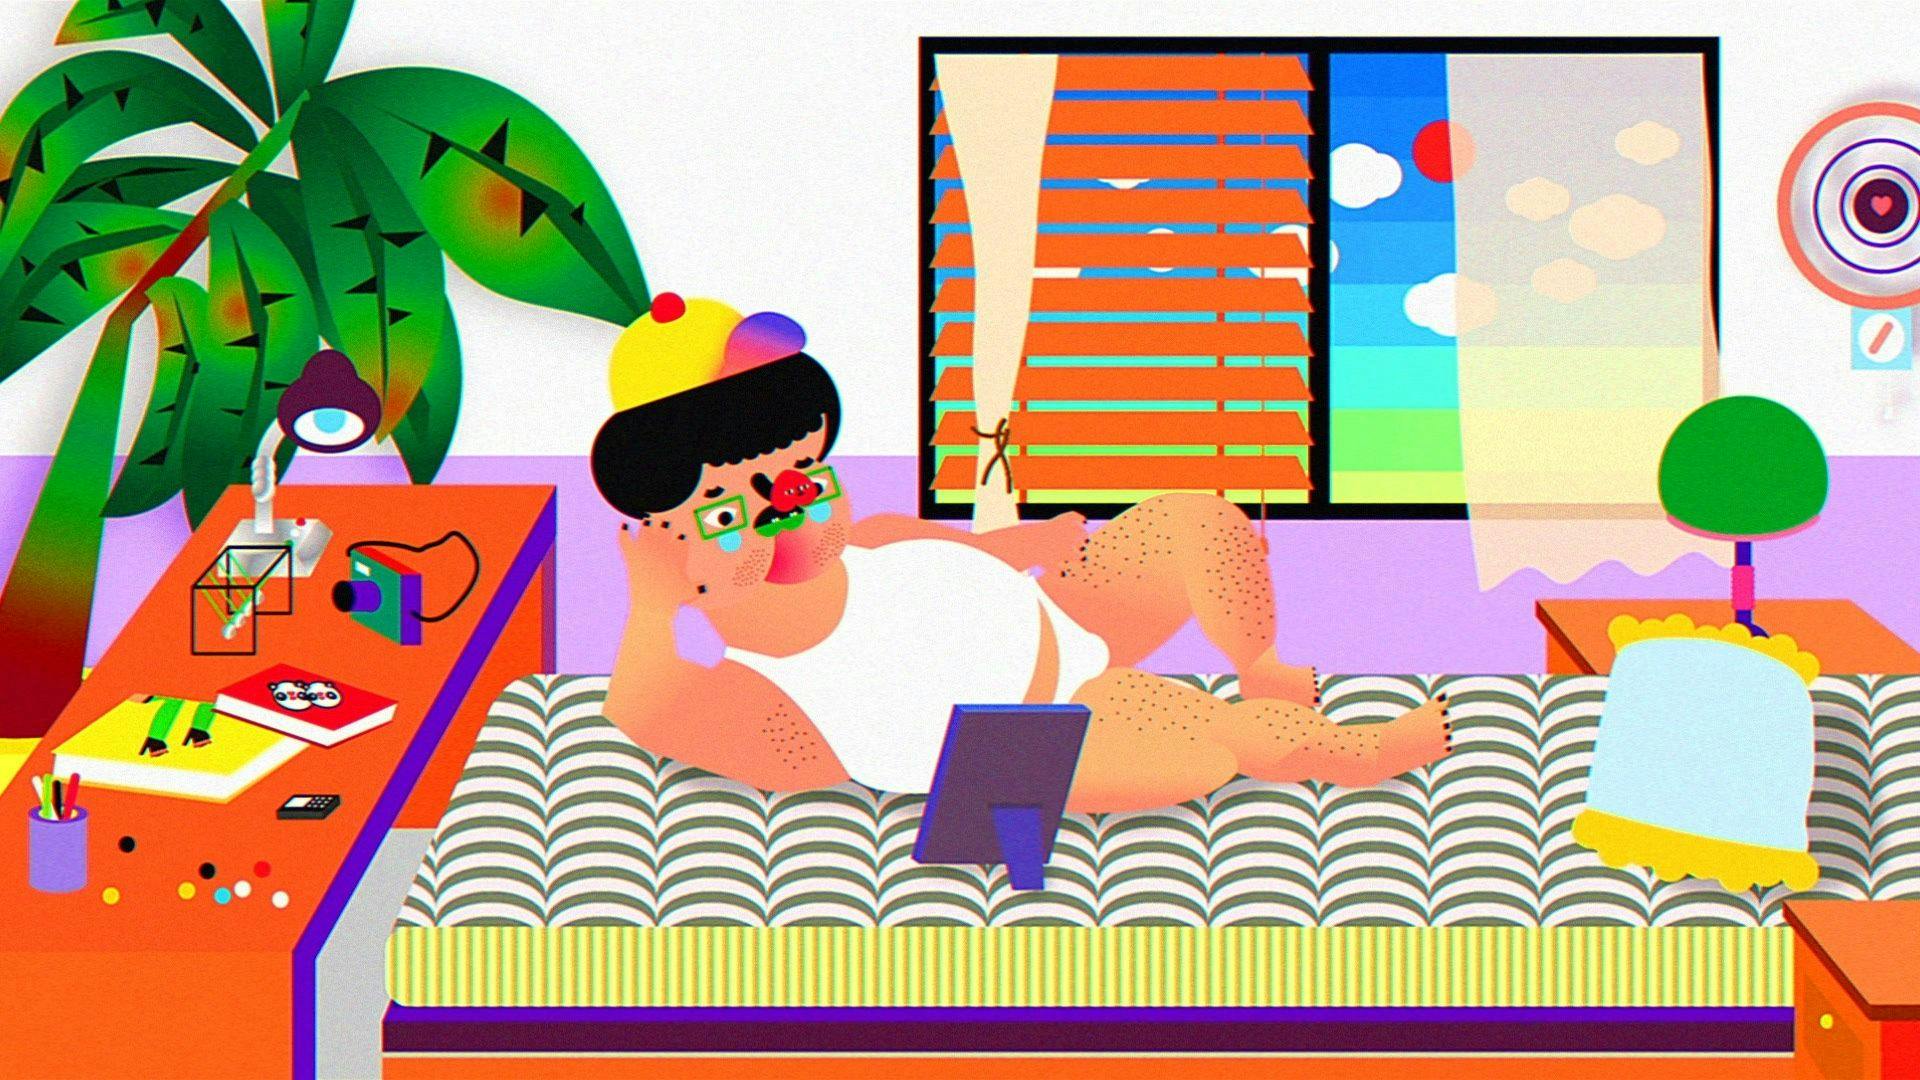 Computer-generated, cartoon-like image of someone lying on a bed in their underwear looking a photoframe. The room around them is full of personal items and the window is open.